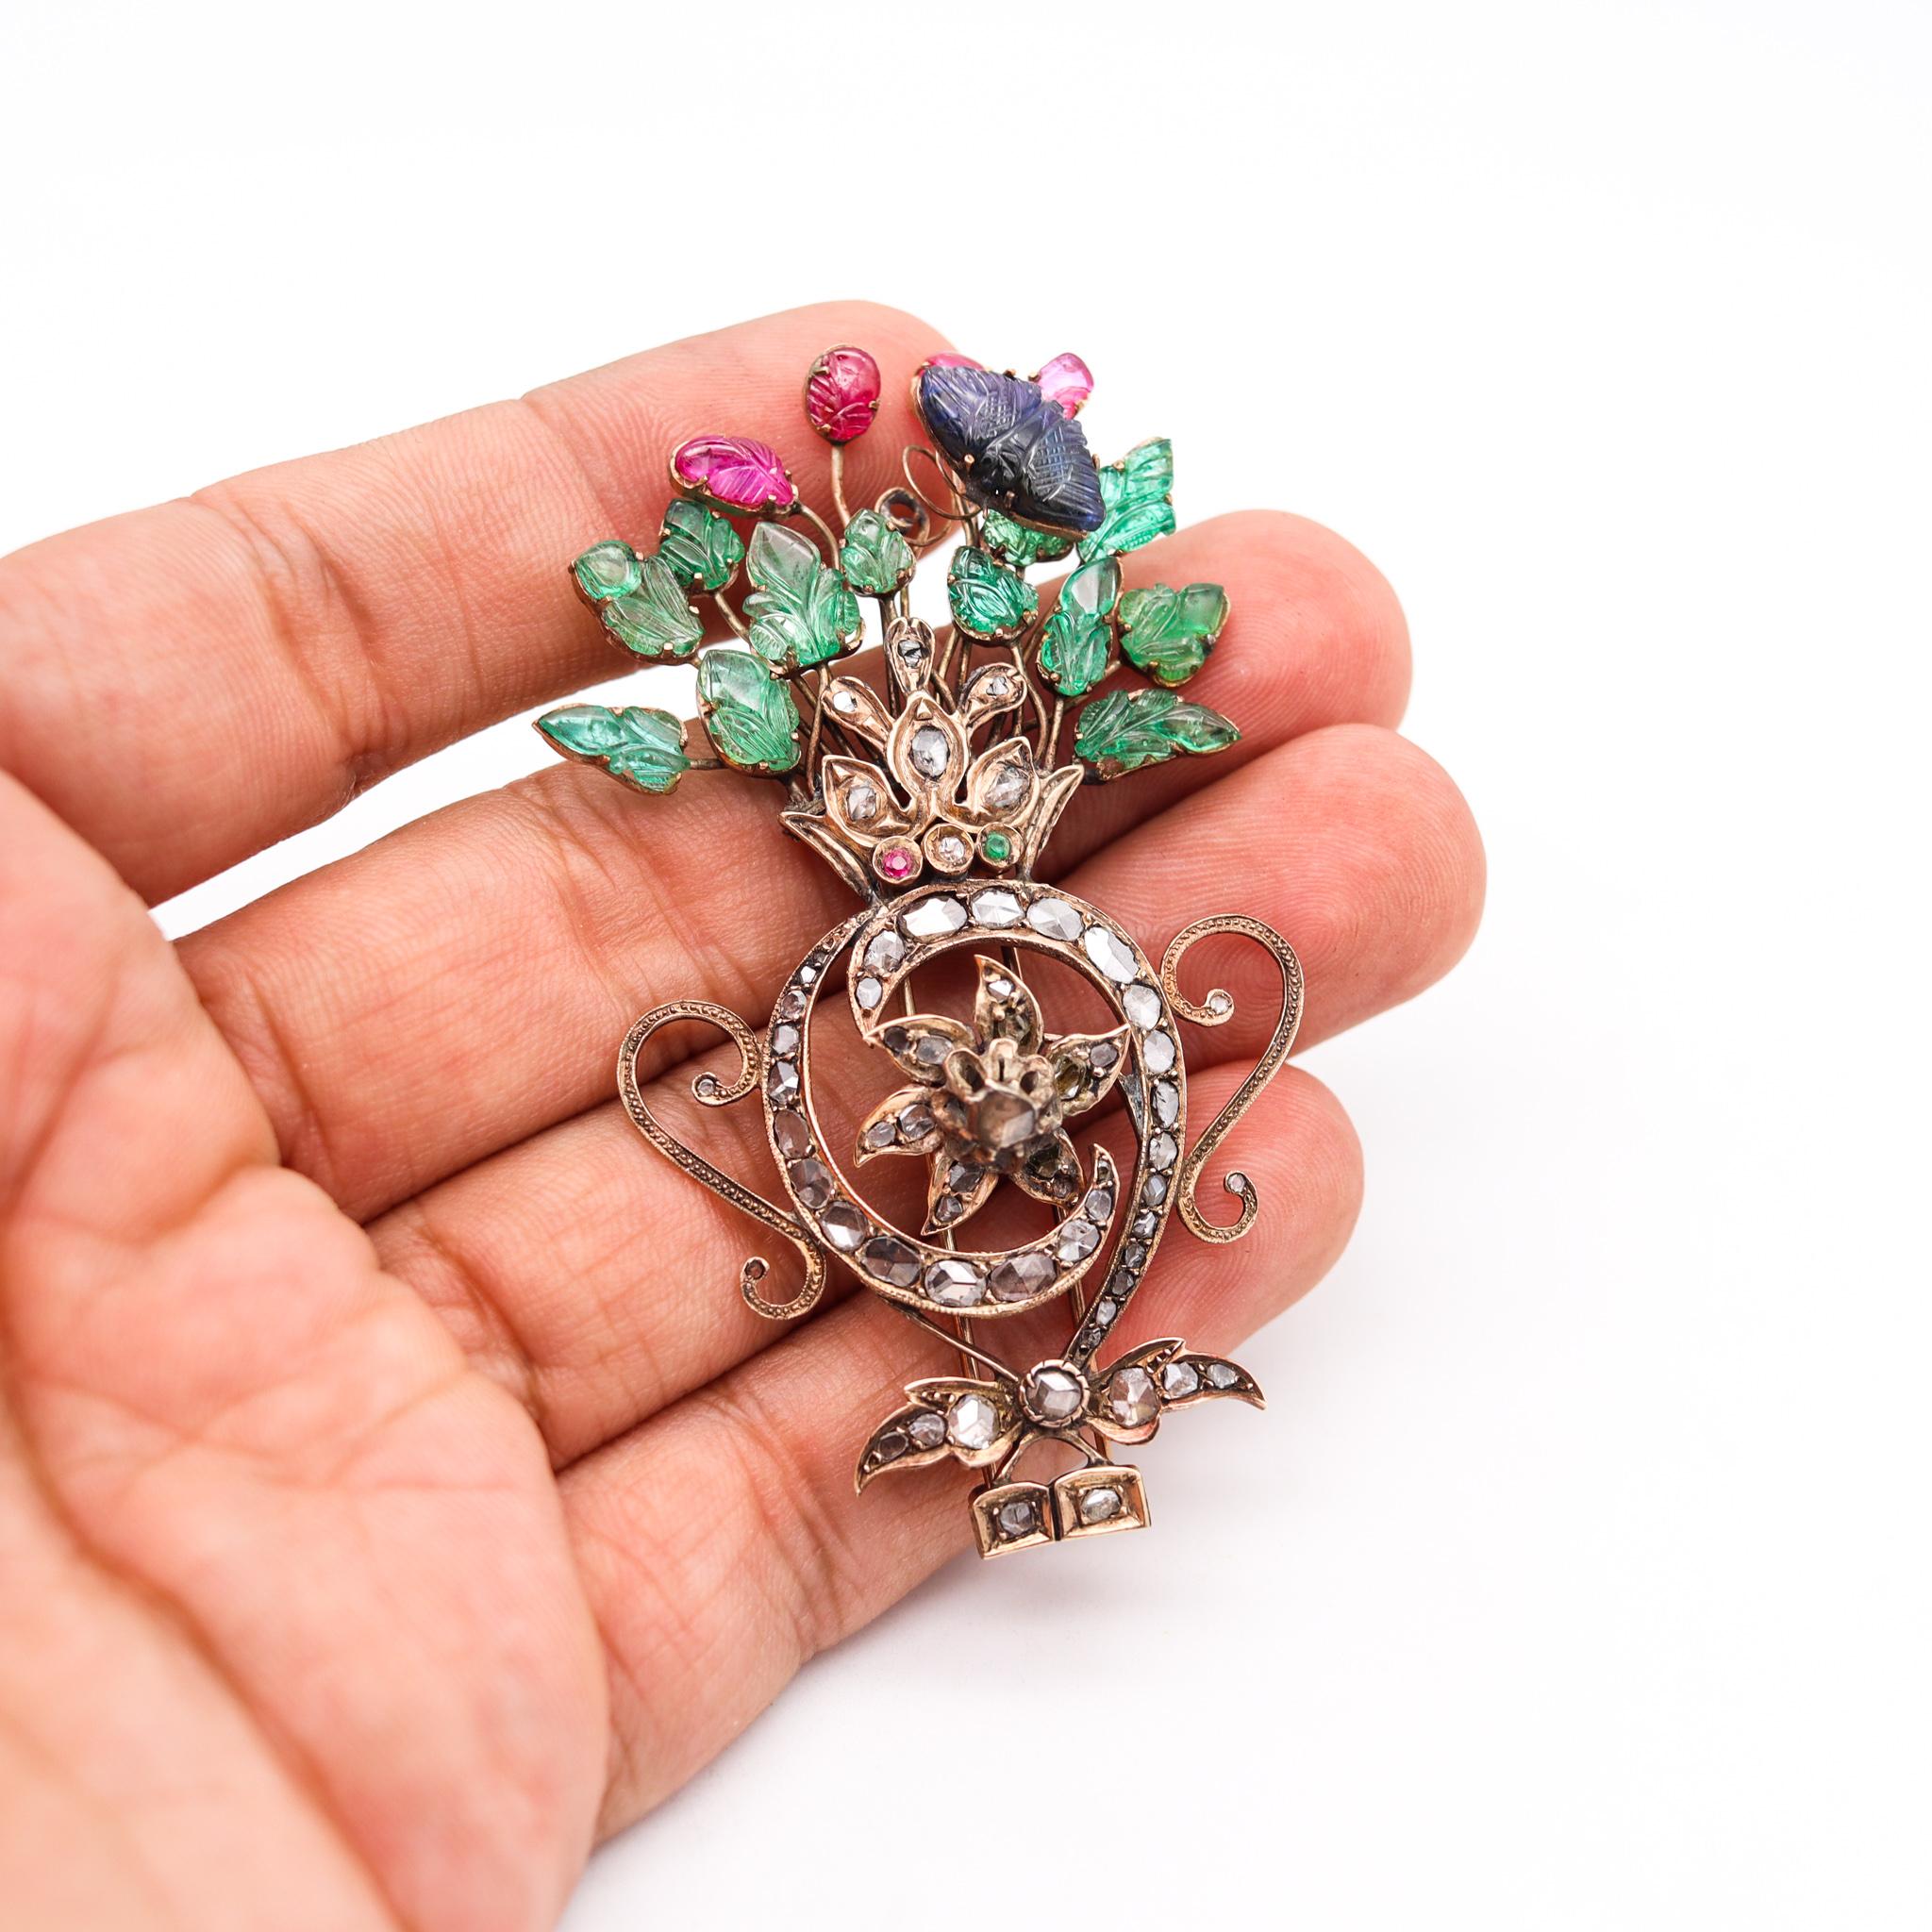 Mixed Cut Victorian 1837 Mughal Tutti Frutti Brooch In 17Kt Gold With Carved Gemstones For Sale